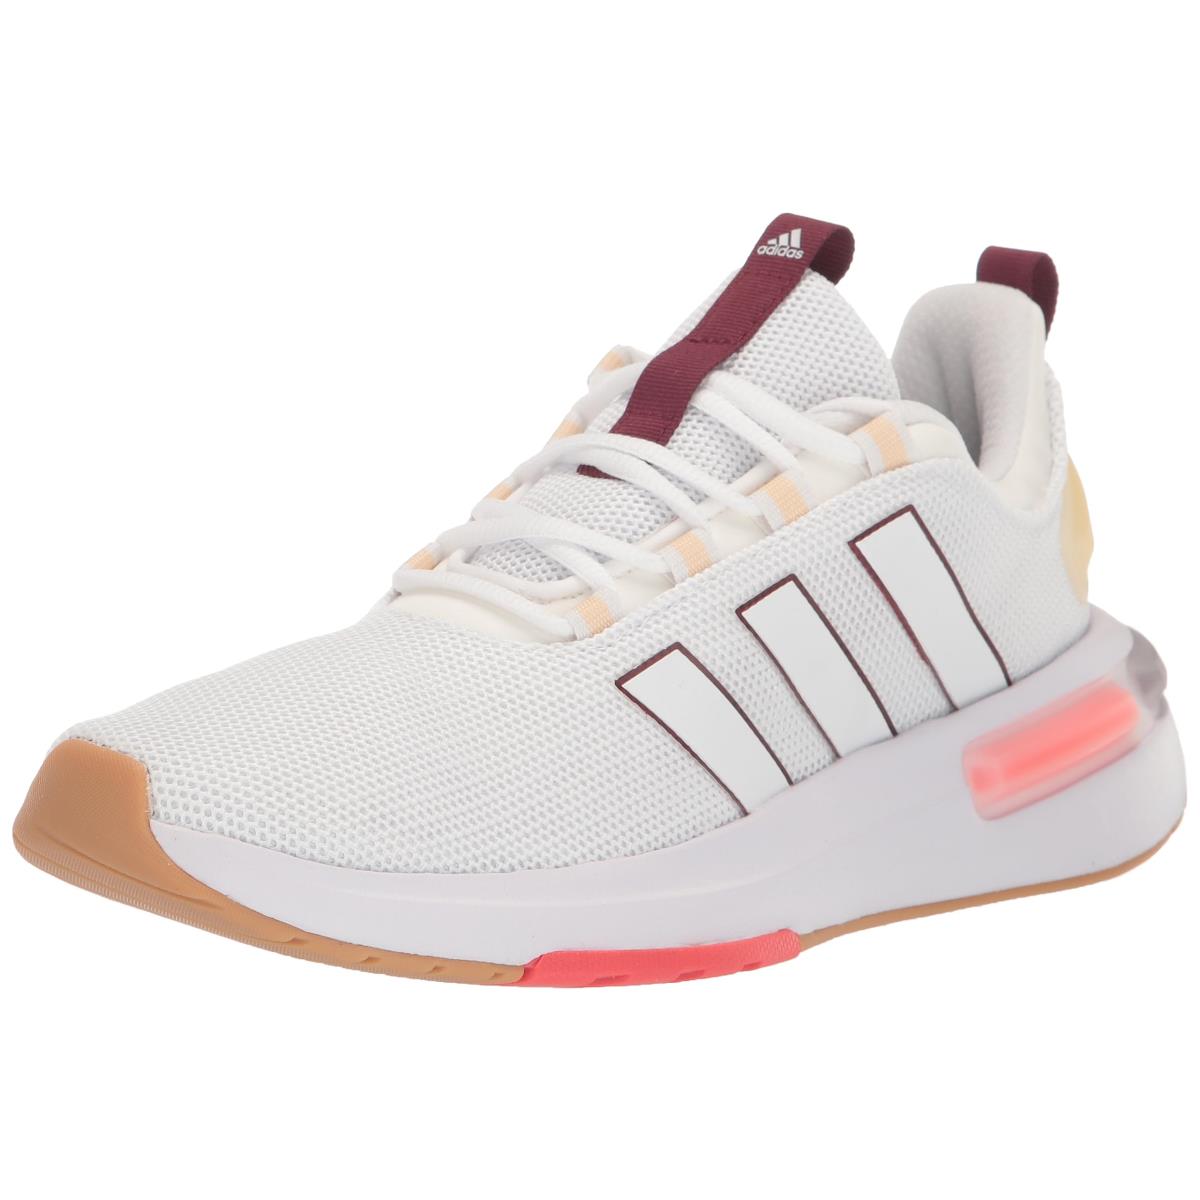 Adidas Women`s Racer Tr23 Shoes Sneaker White/White/Bright Red